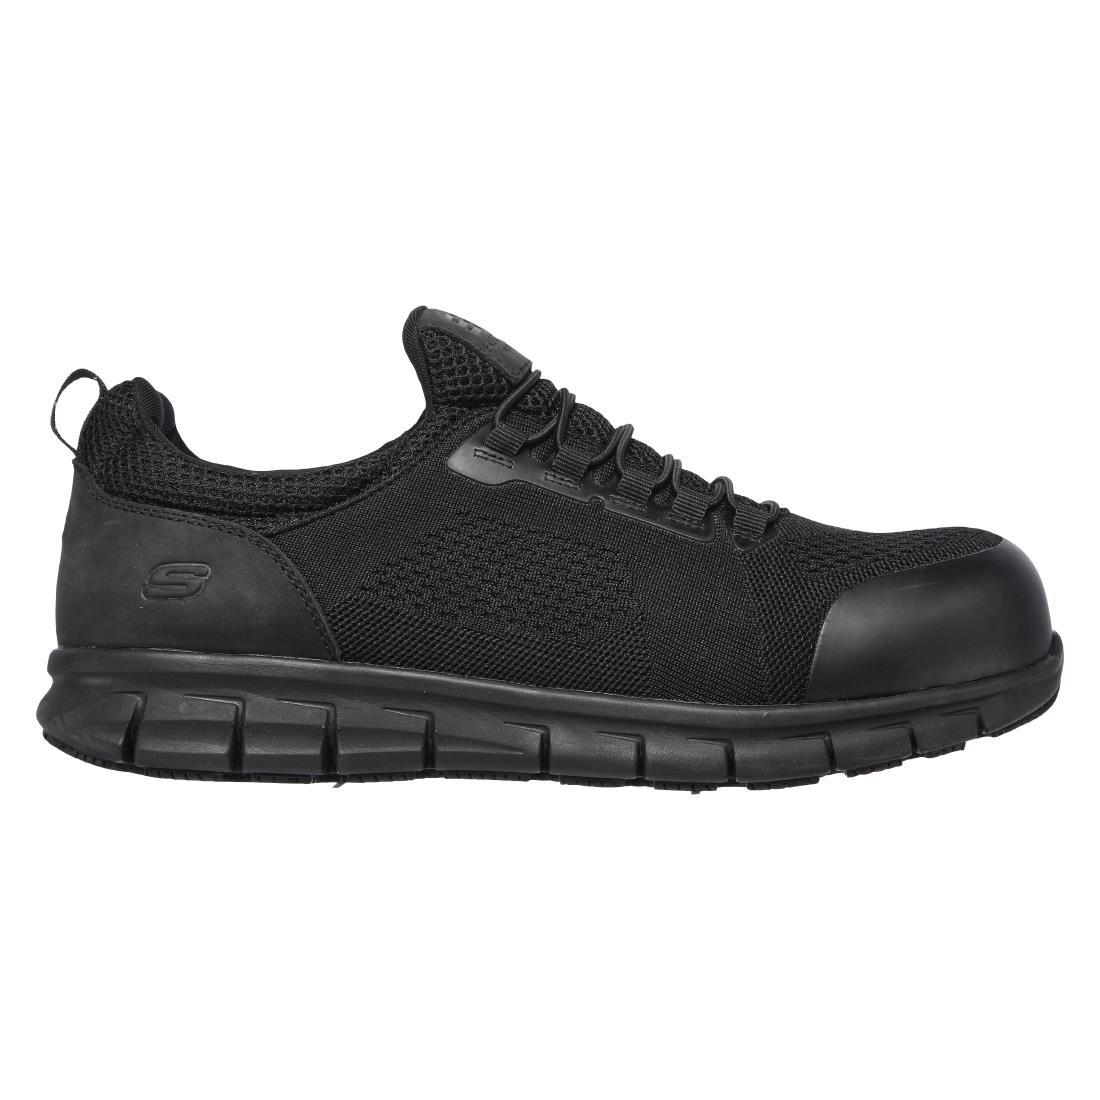 Skechers Safety Shoe with Steel Toe Cap Size 42 - BB675-42  - 4